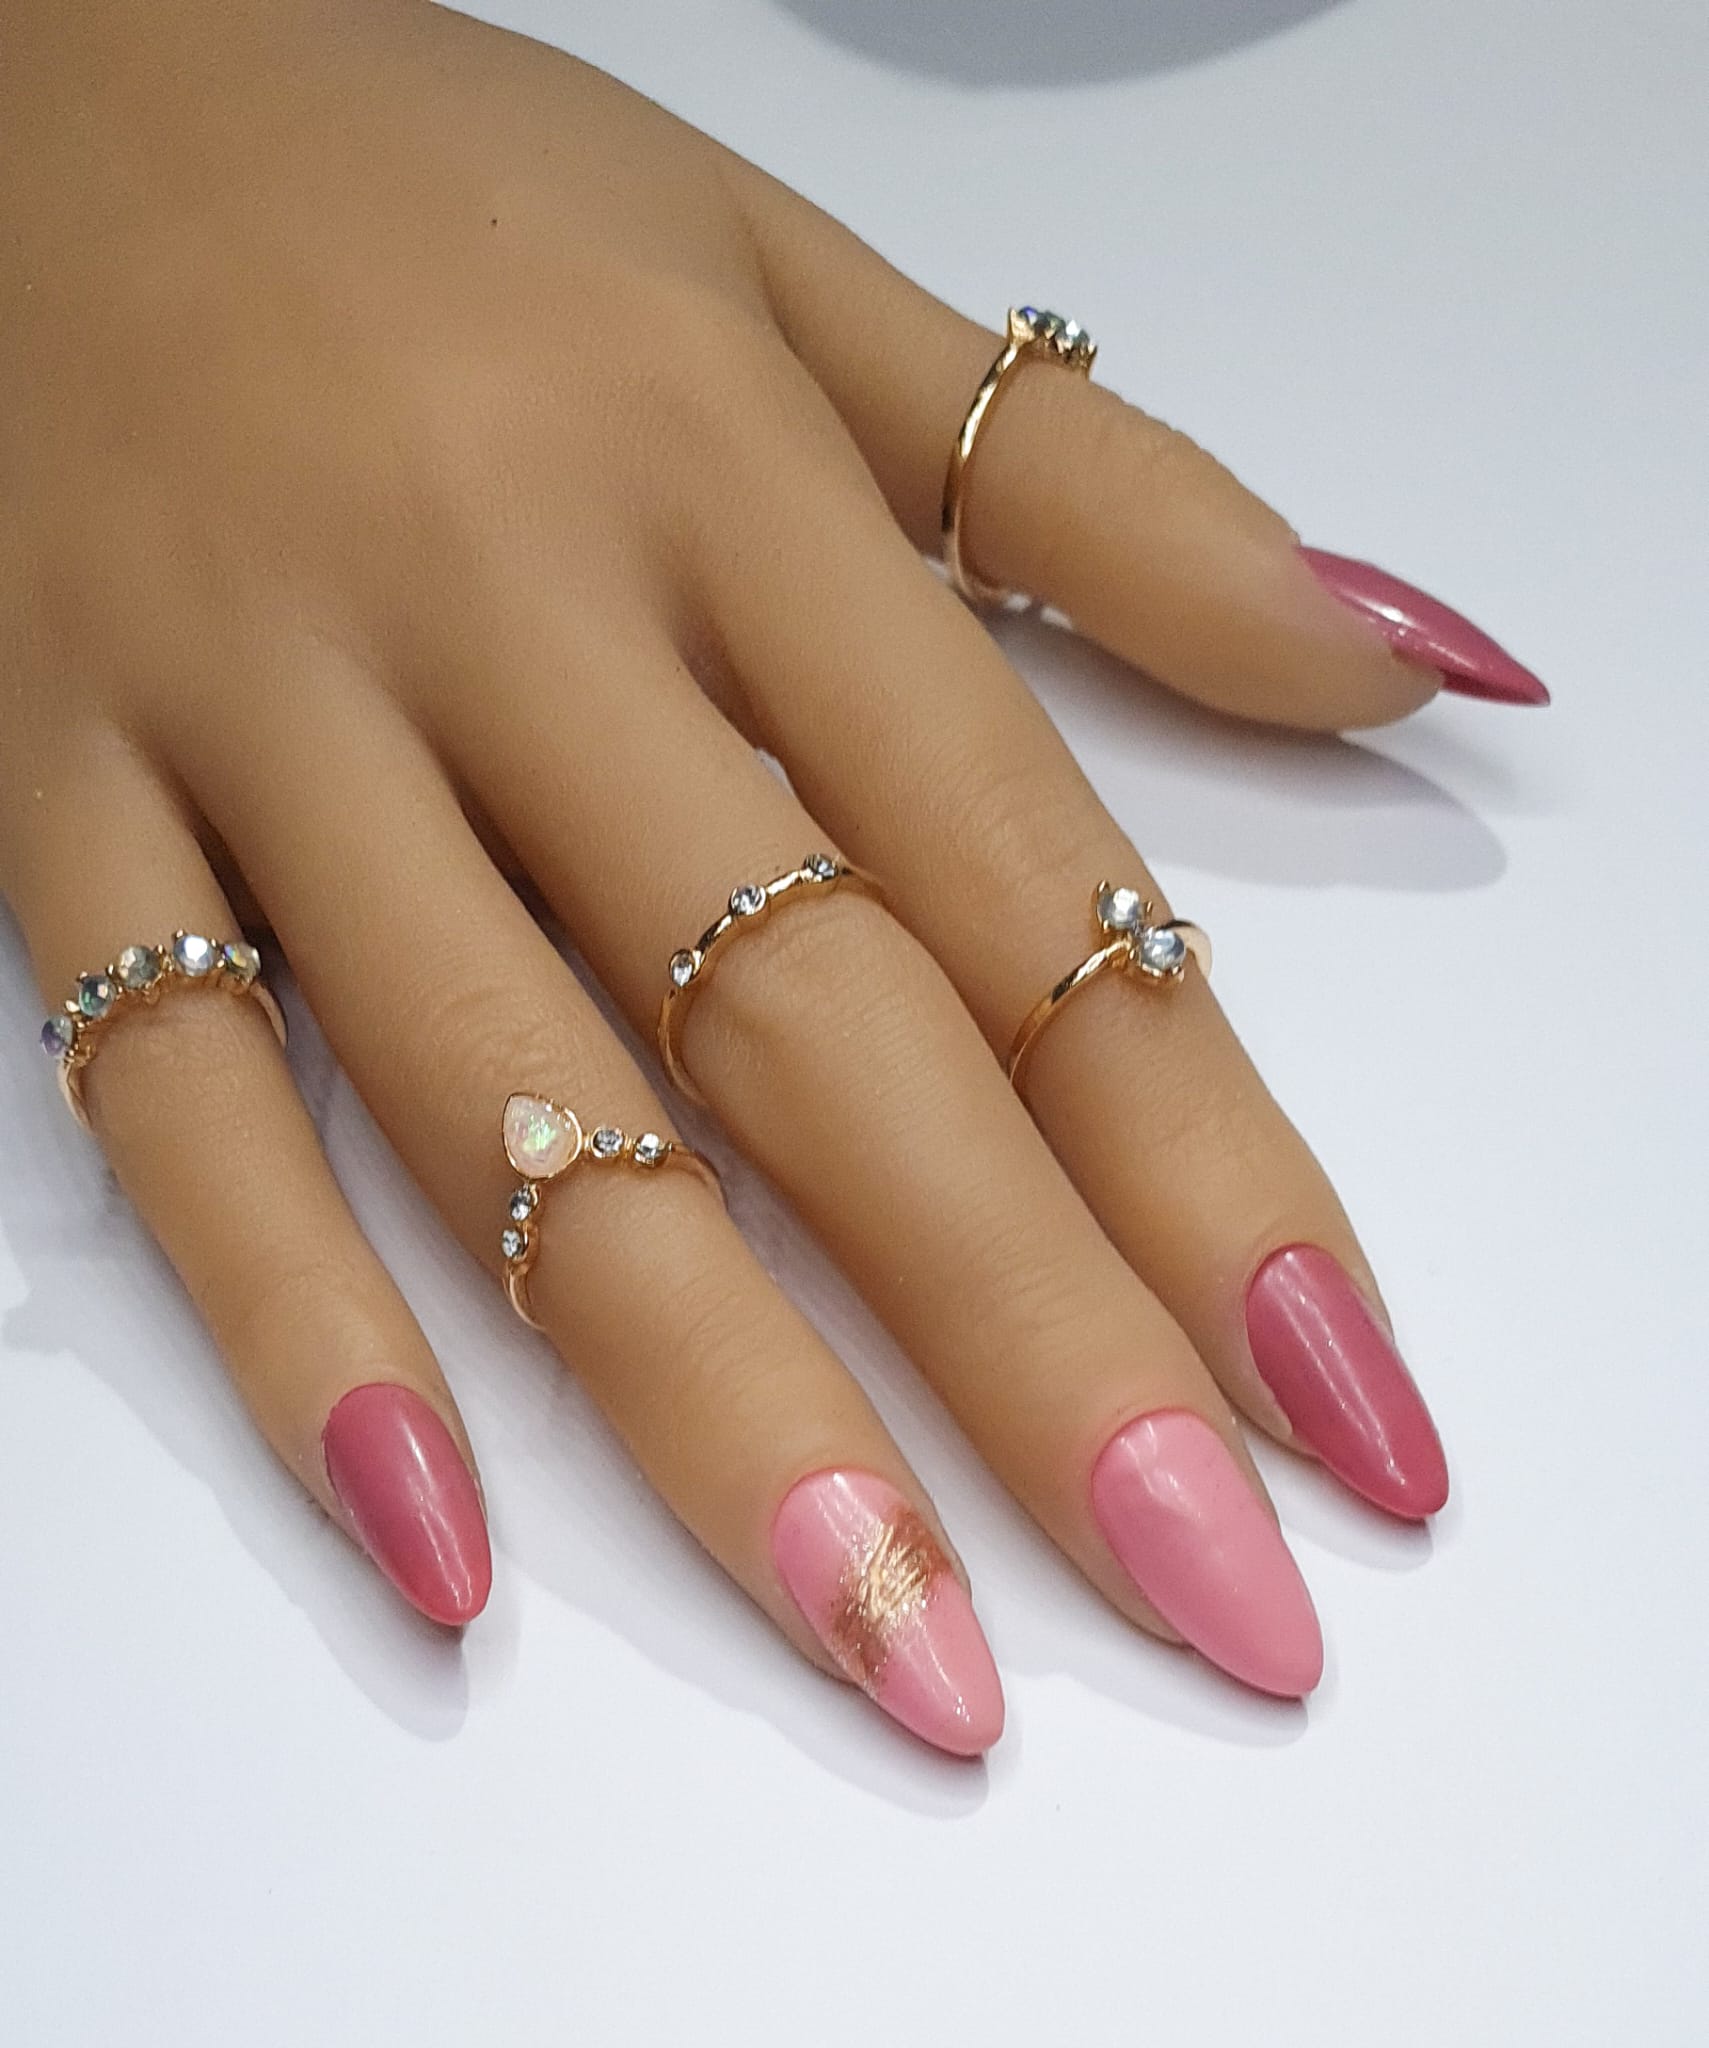 pink almond shaped press on nails blush pink press extra short spring summer collection full cover gel tip luxury false nails salon quality hand painted custom made uk